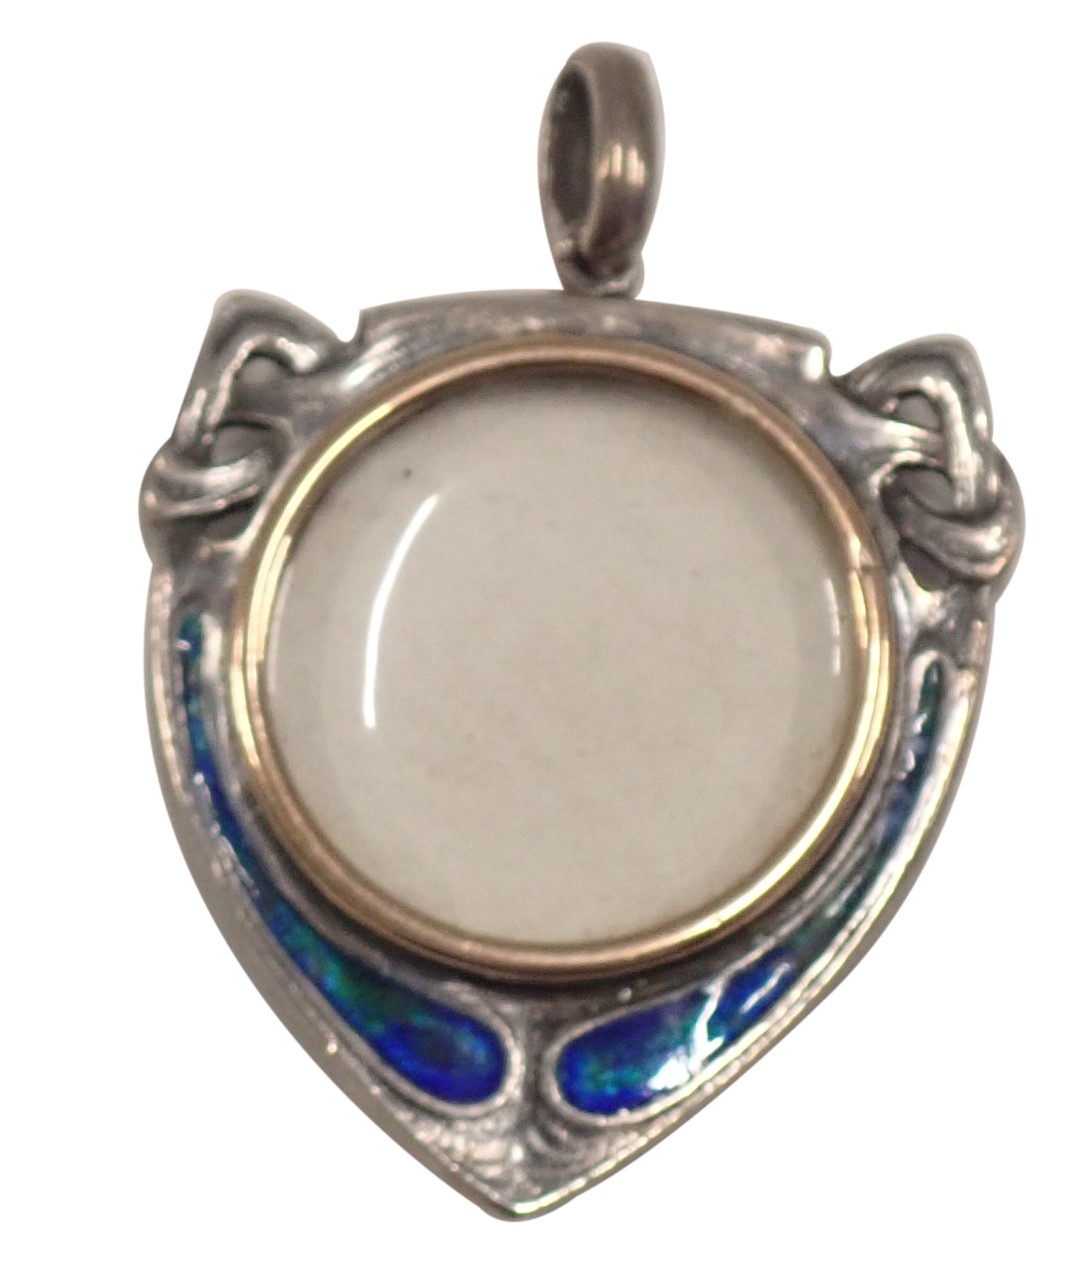 An Art Nouveau shield locket, with a brushed gold central section, in a white metal case set with bl